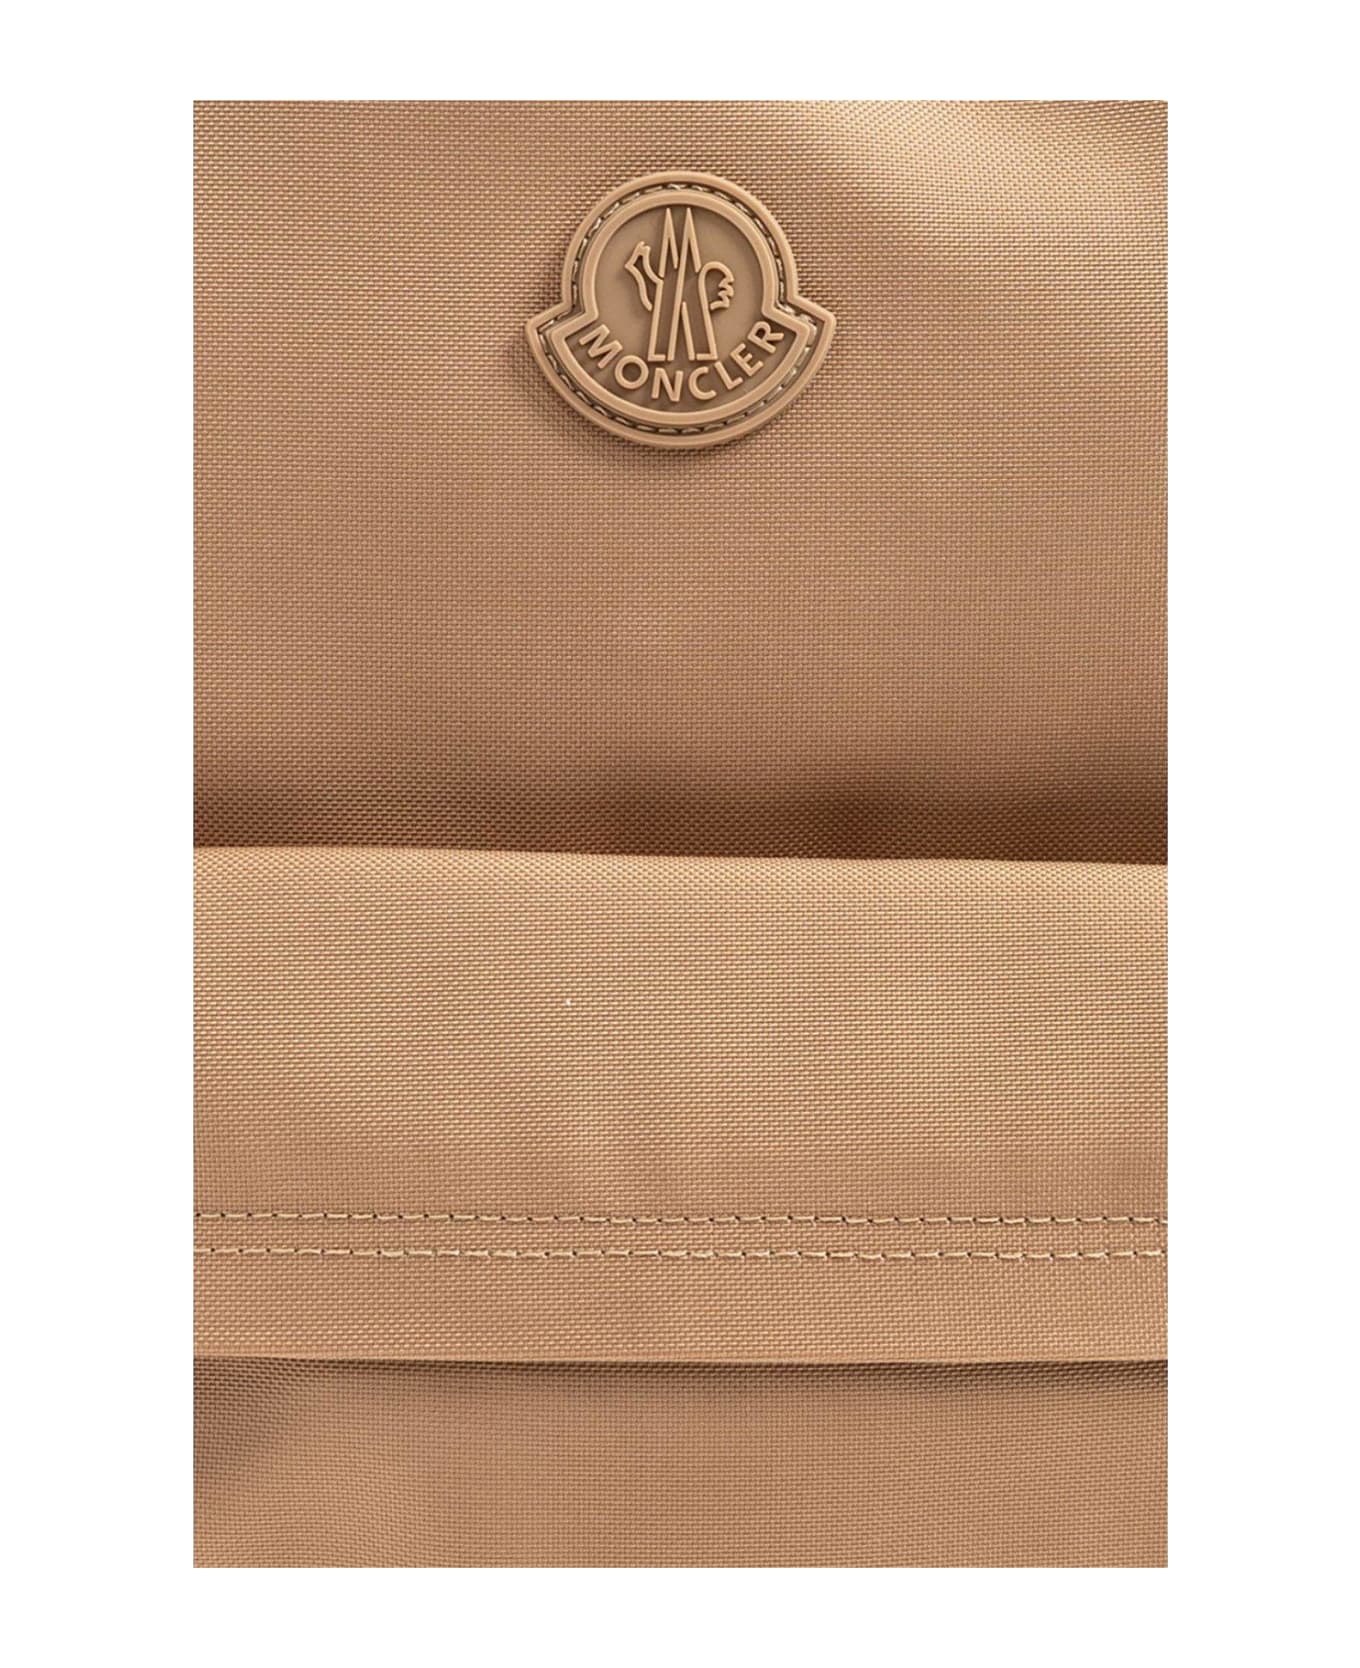 Moncler New Pierrick Logo Patch Zipped Backpack - Brown バックパック